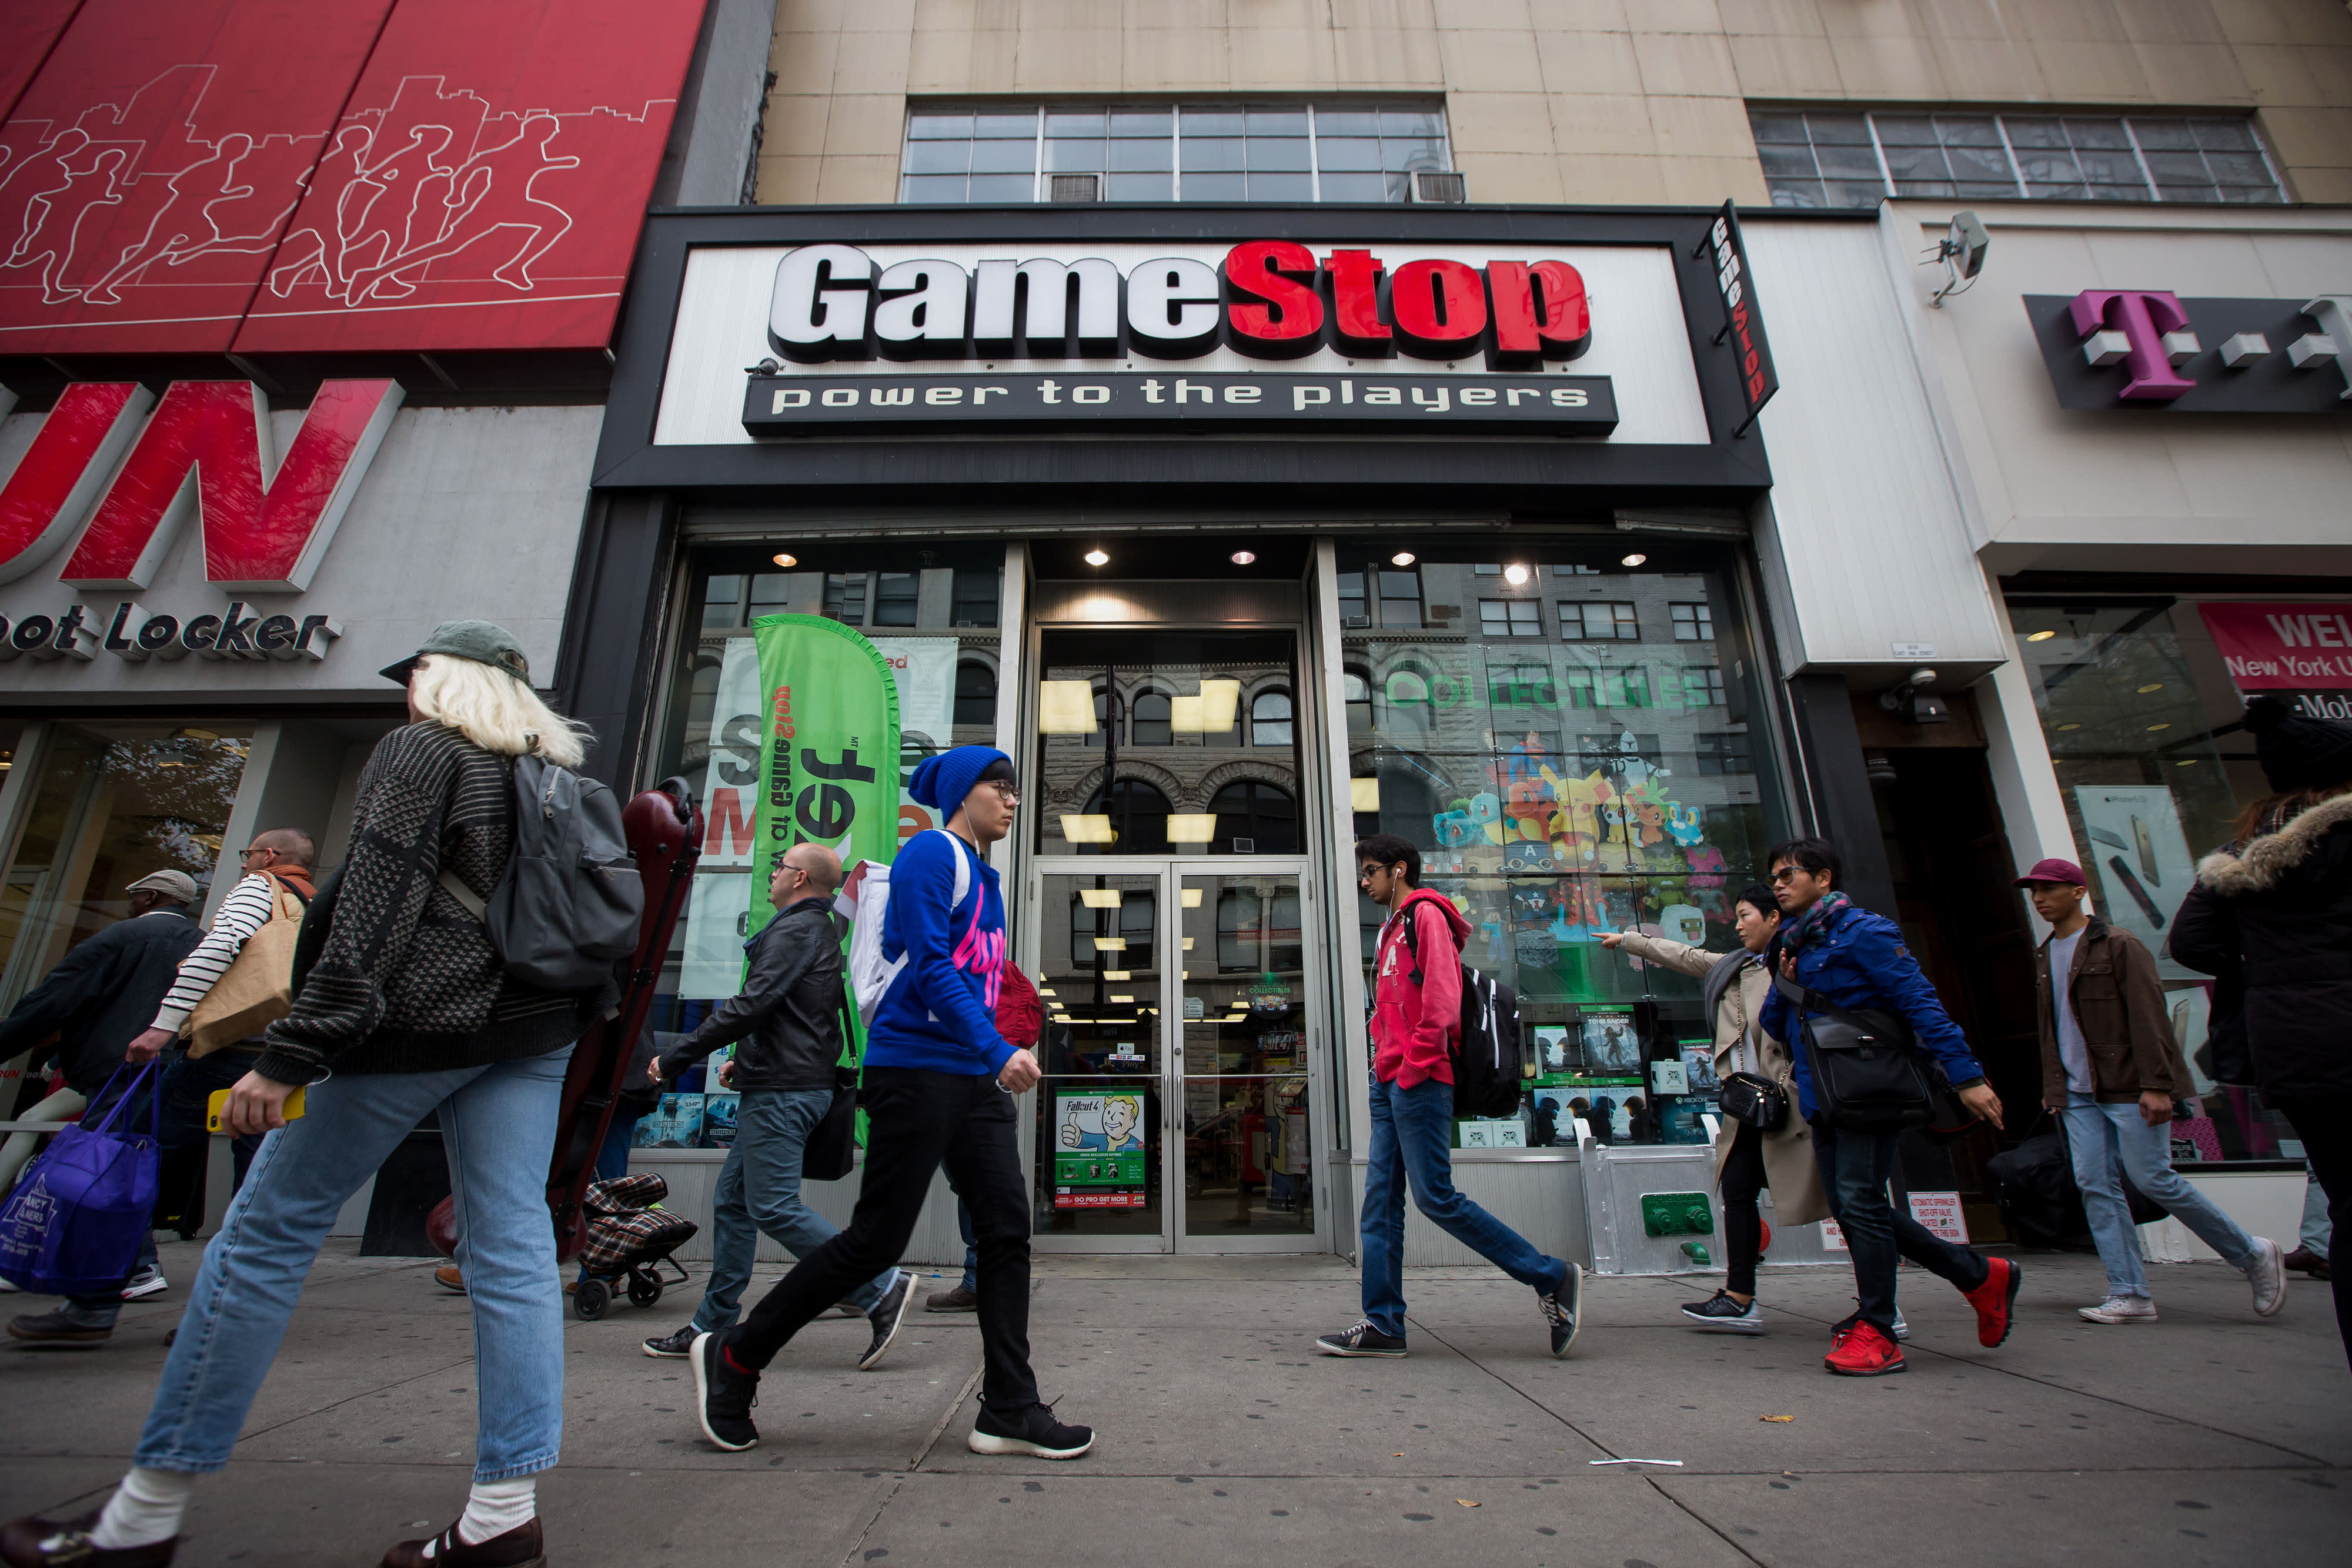 Gamestop Near Me Open Tomorrow - Gamestop Black Friday 2020 Best Deals - What Stores Near Me Are Open For Black Friday